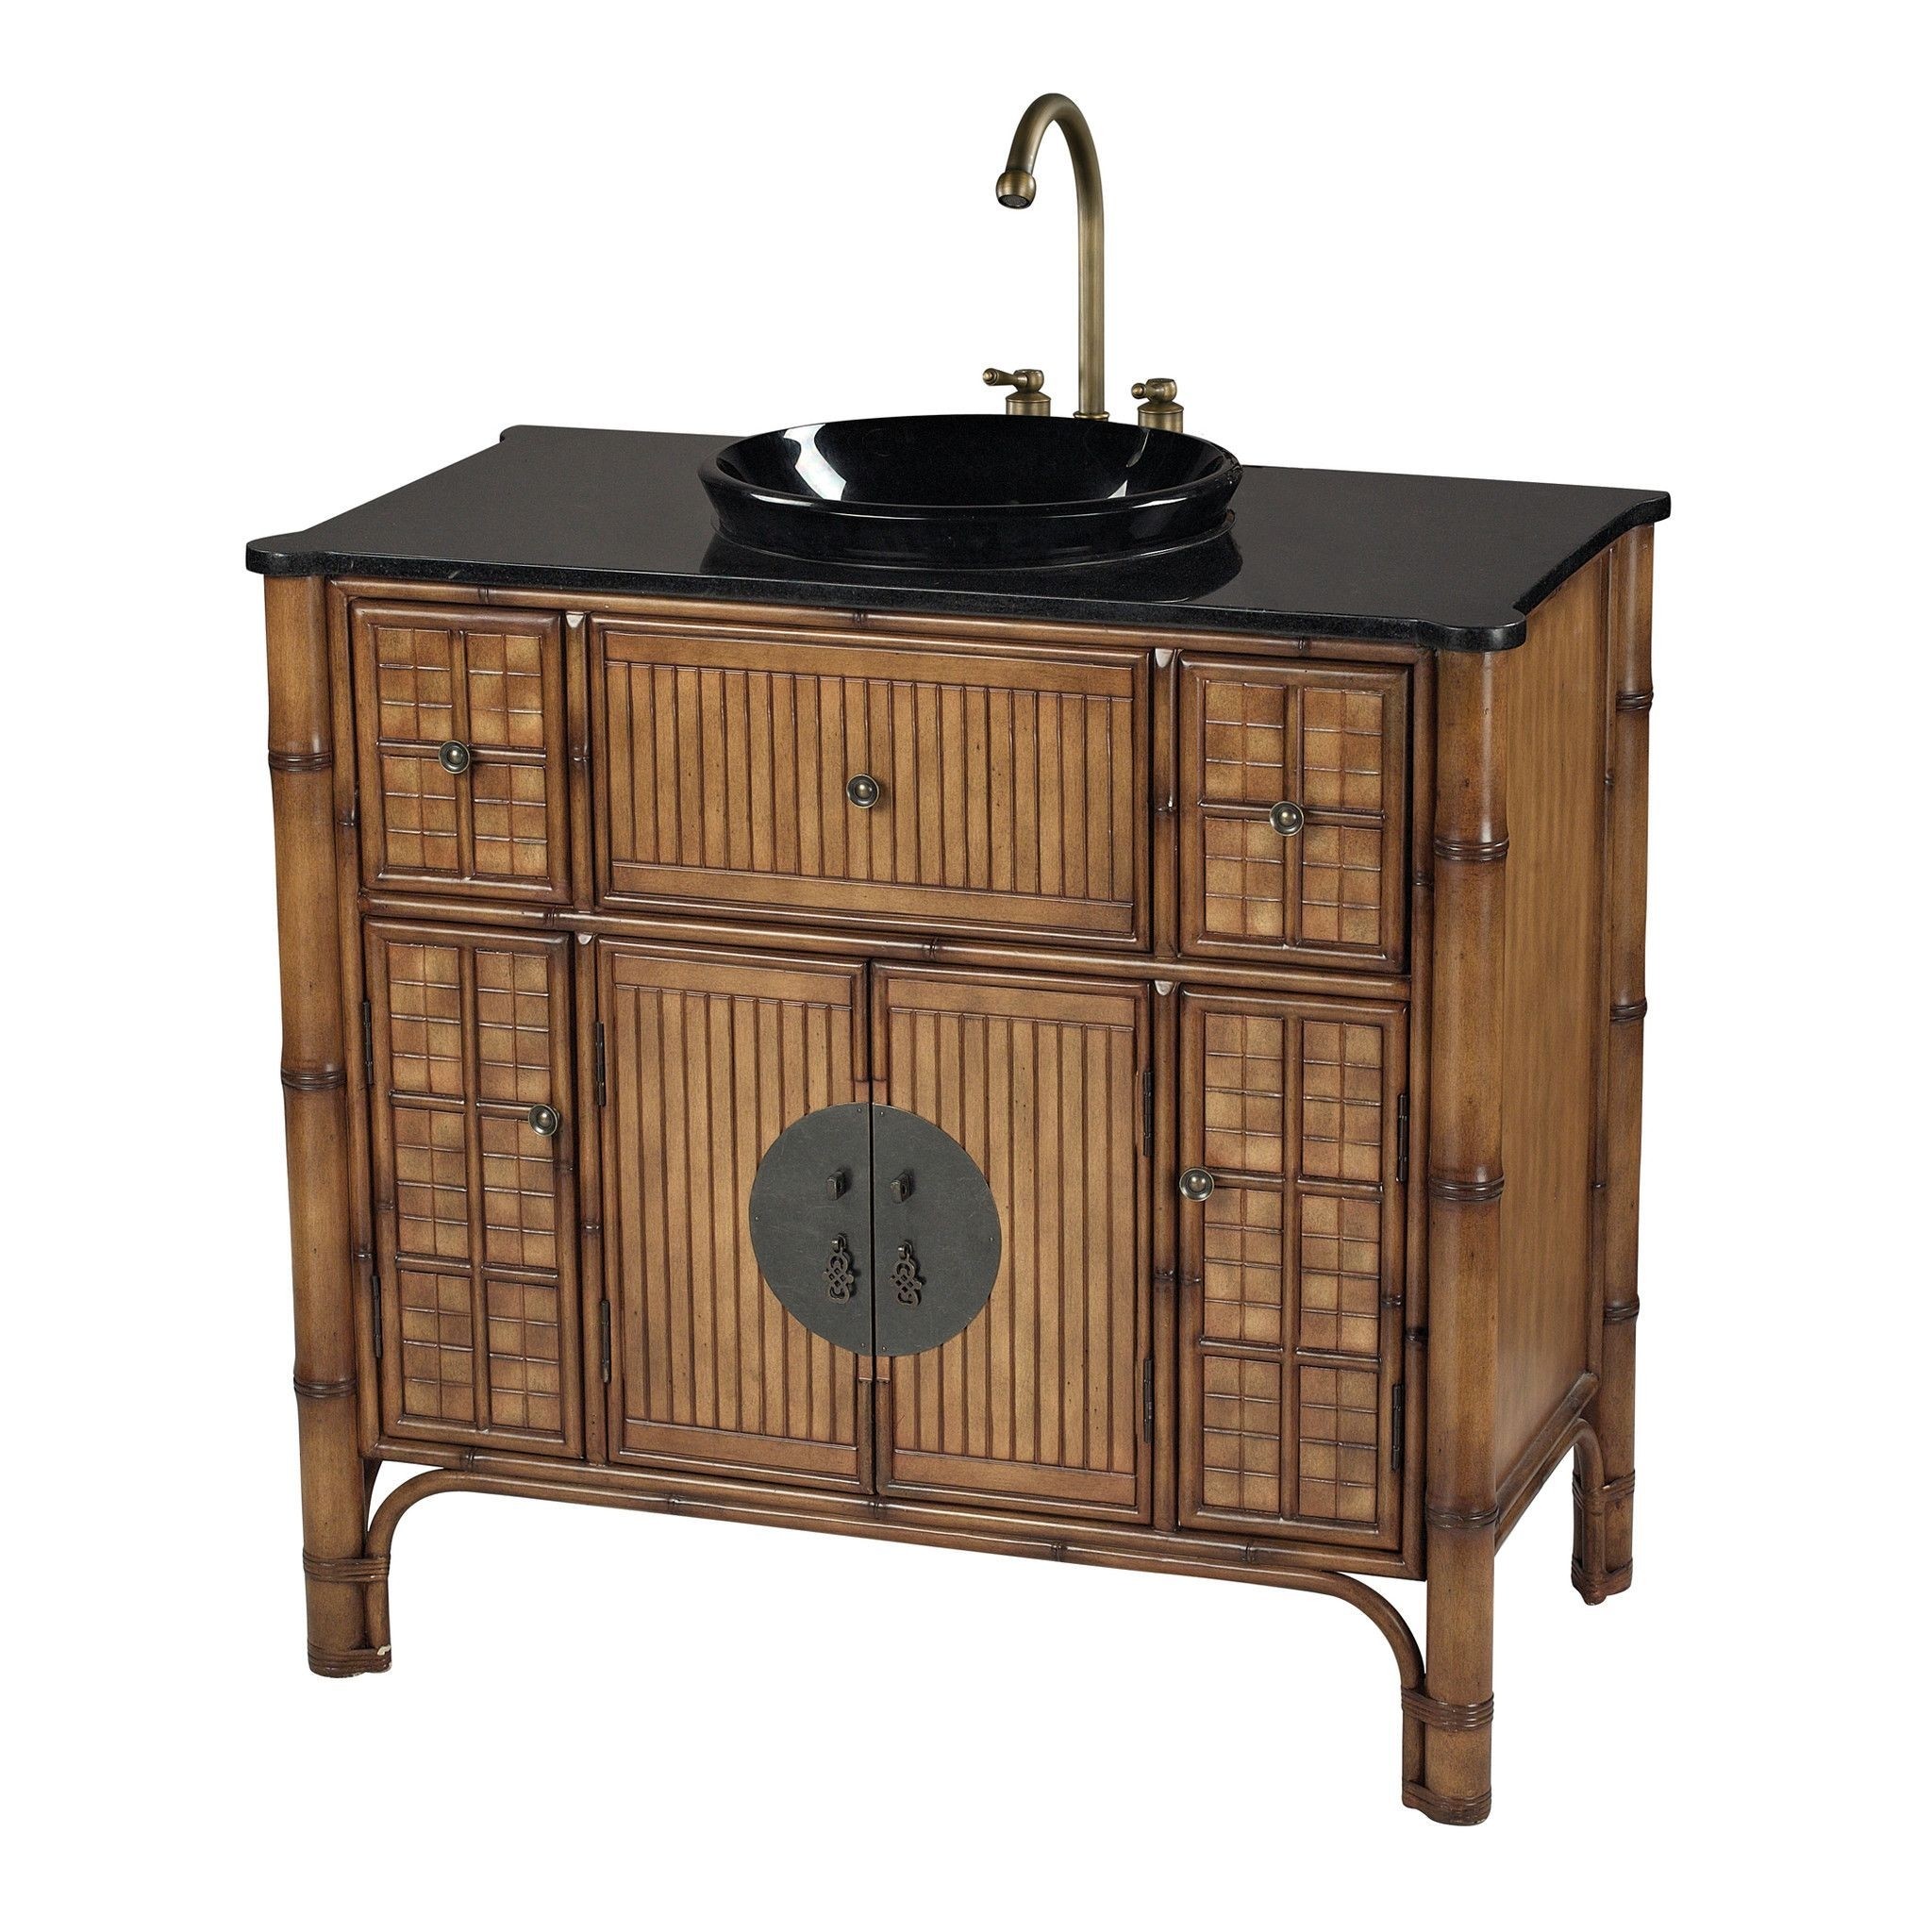 Sheerwater bamboo vanity unit by sterling bamboo